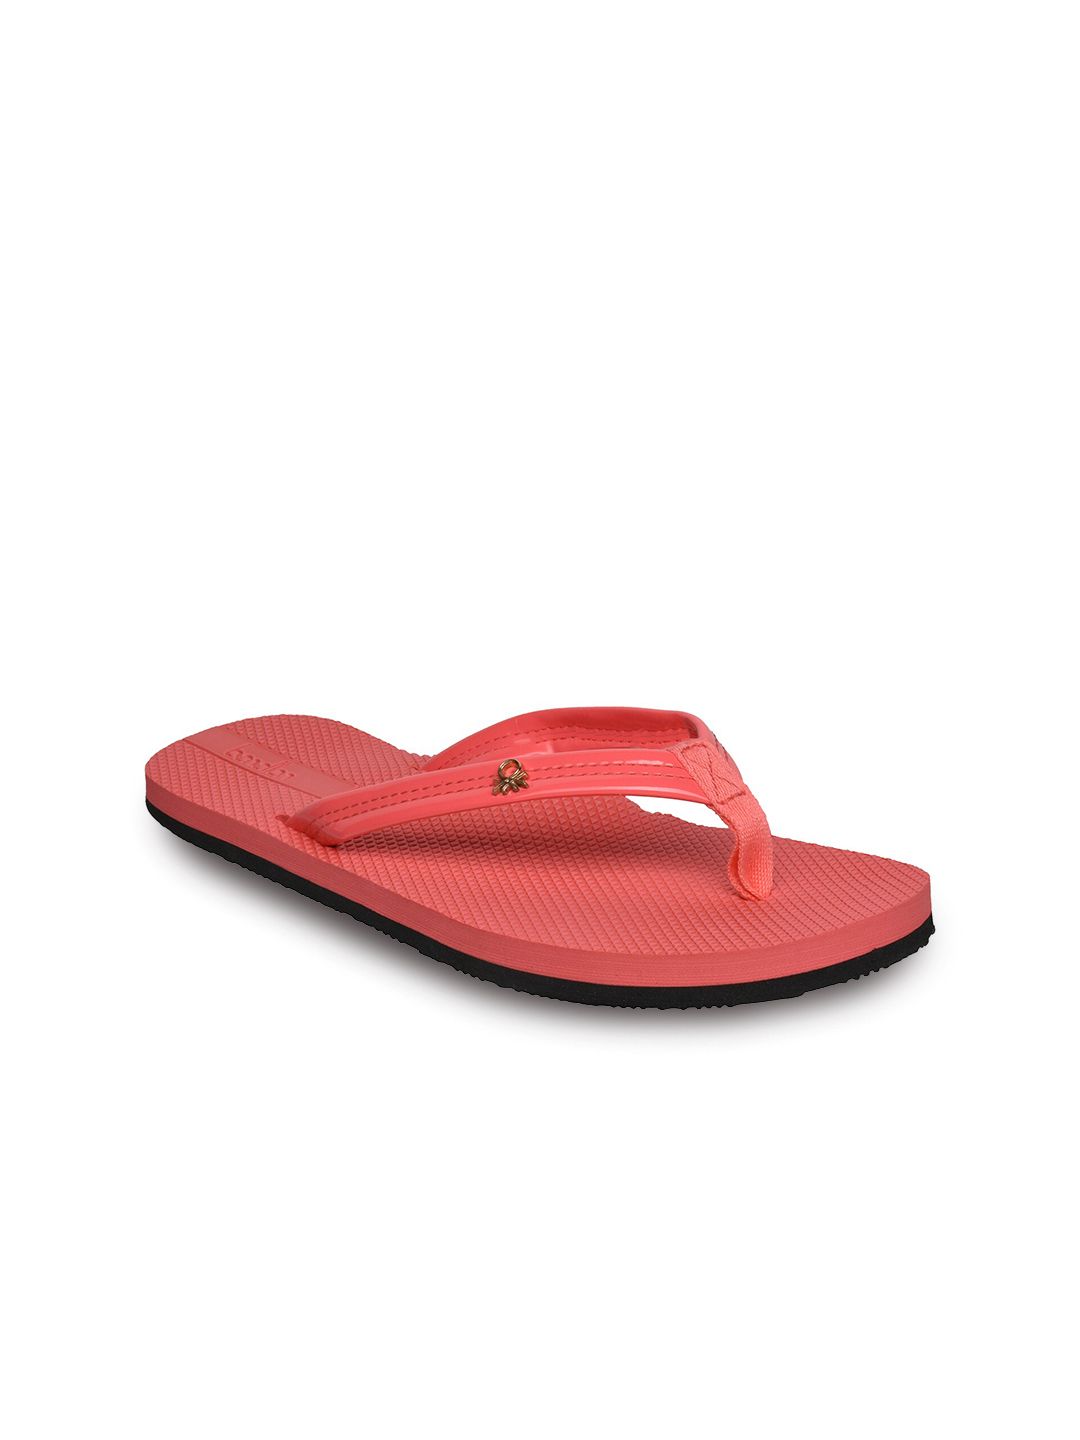 United Colors of Benetton Women Peach Thong Flip-Flops Price in India